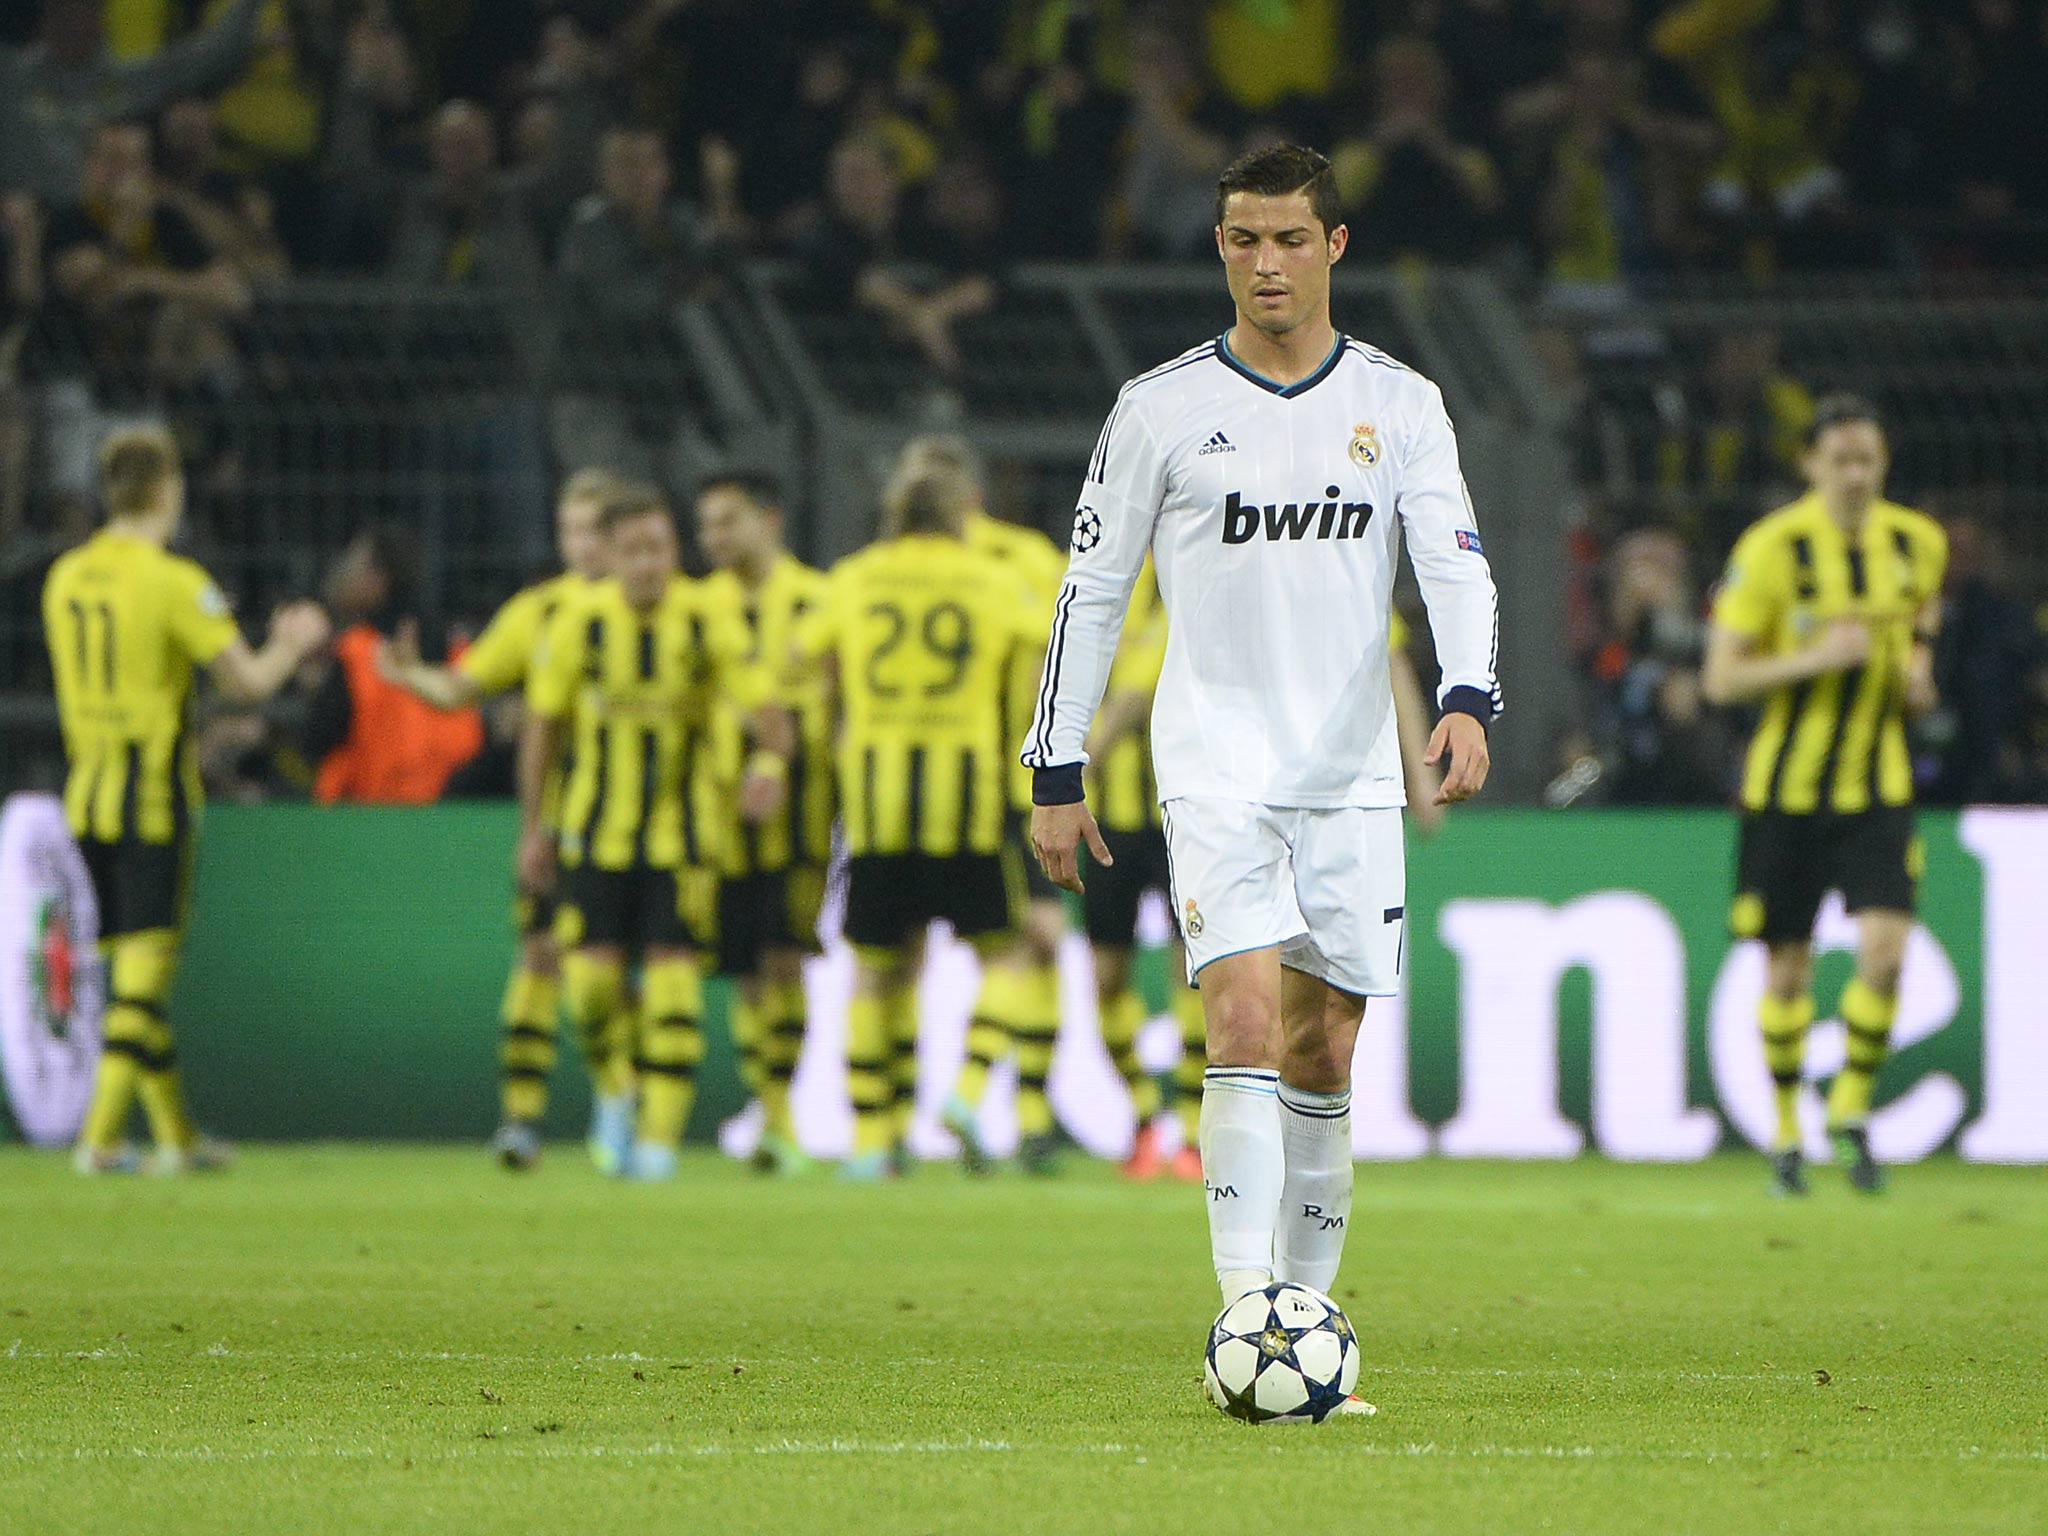 Cristiano Ronaldo pictured in action as Dortmund celebrate a goal in their 4-1 win over Real Madrid